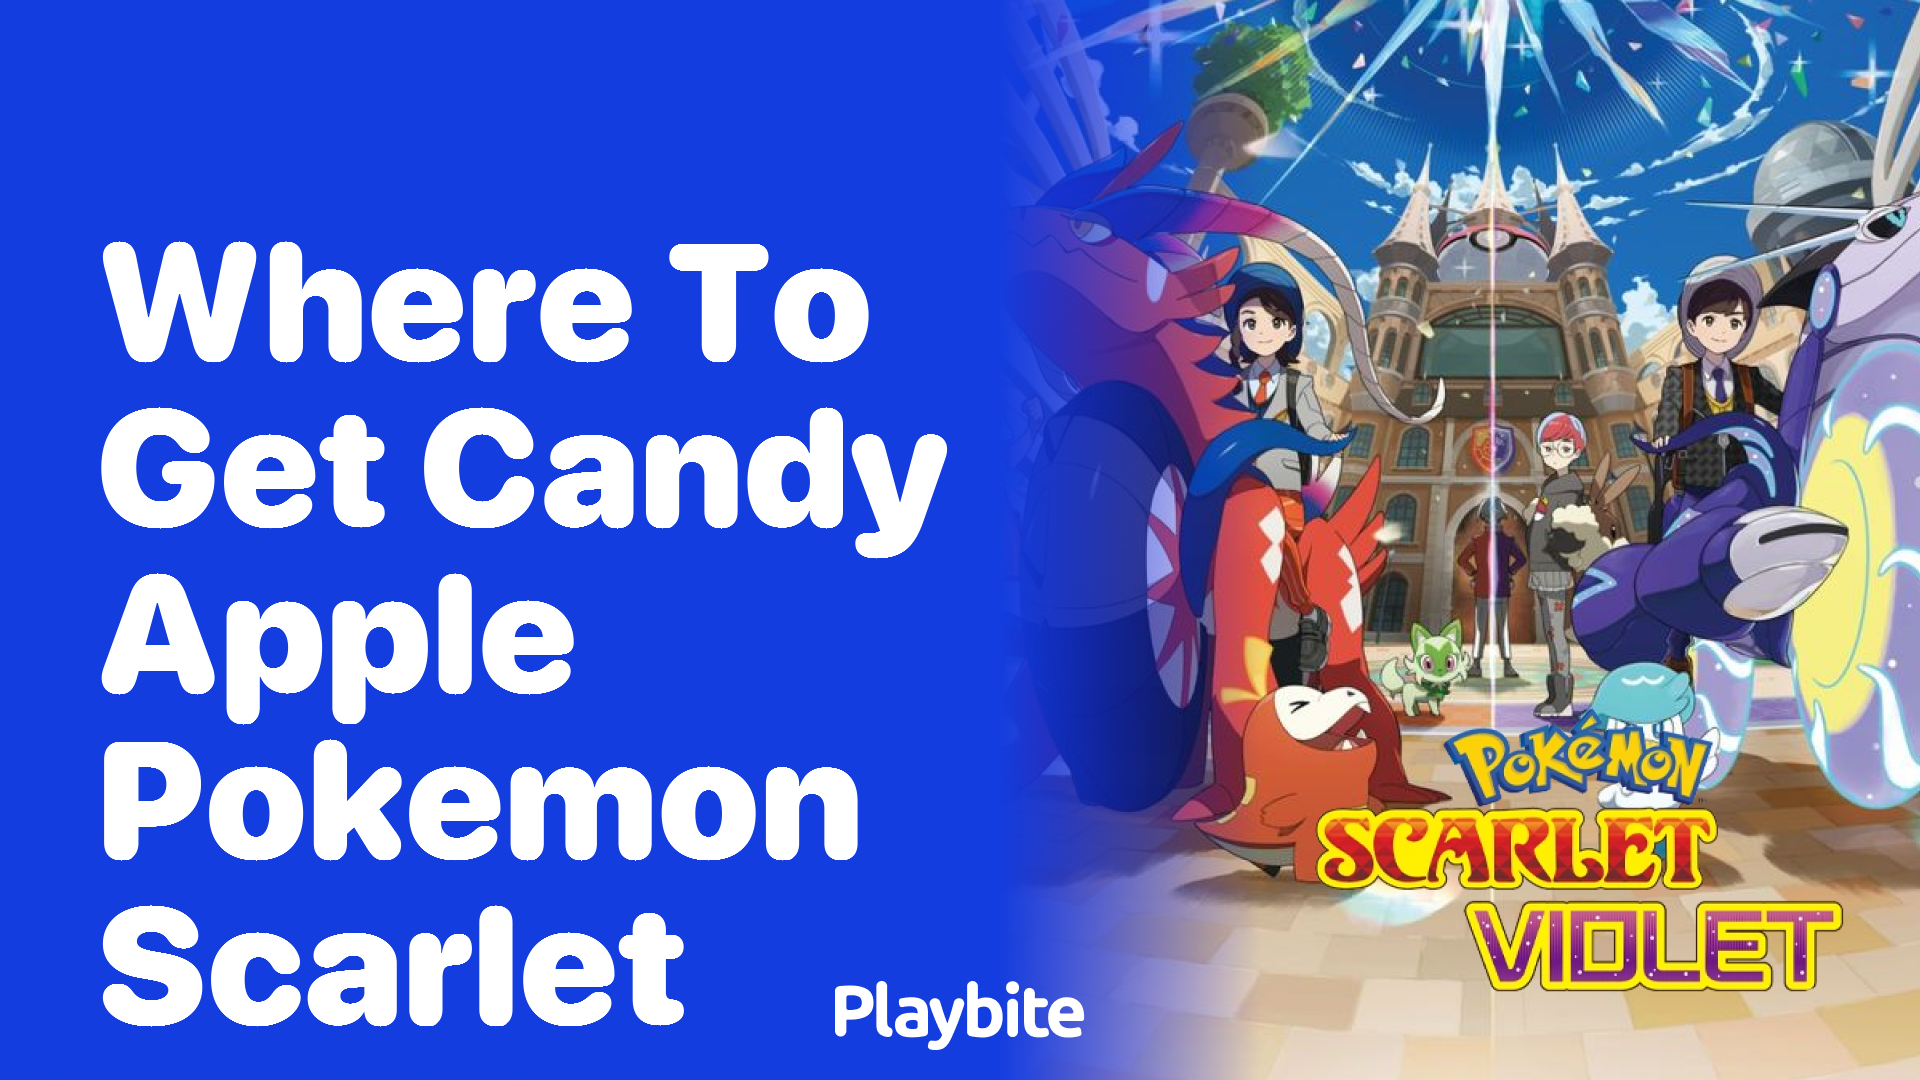 Where to get a Candy Apple in Pokemon Scarlet